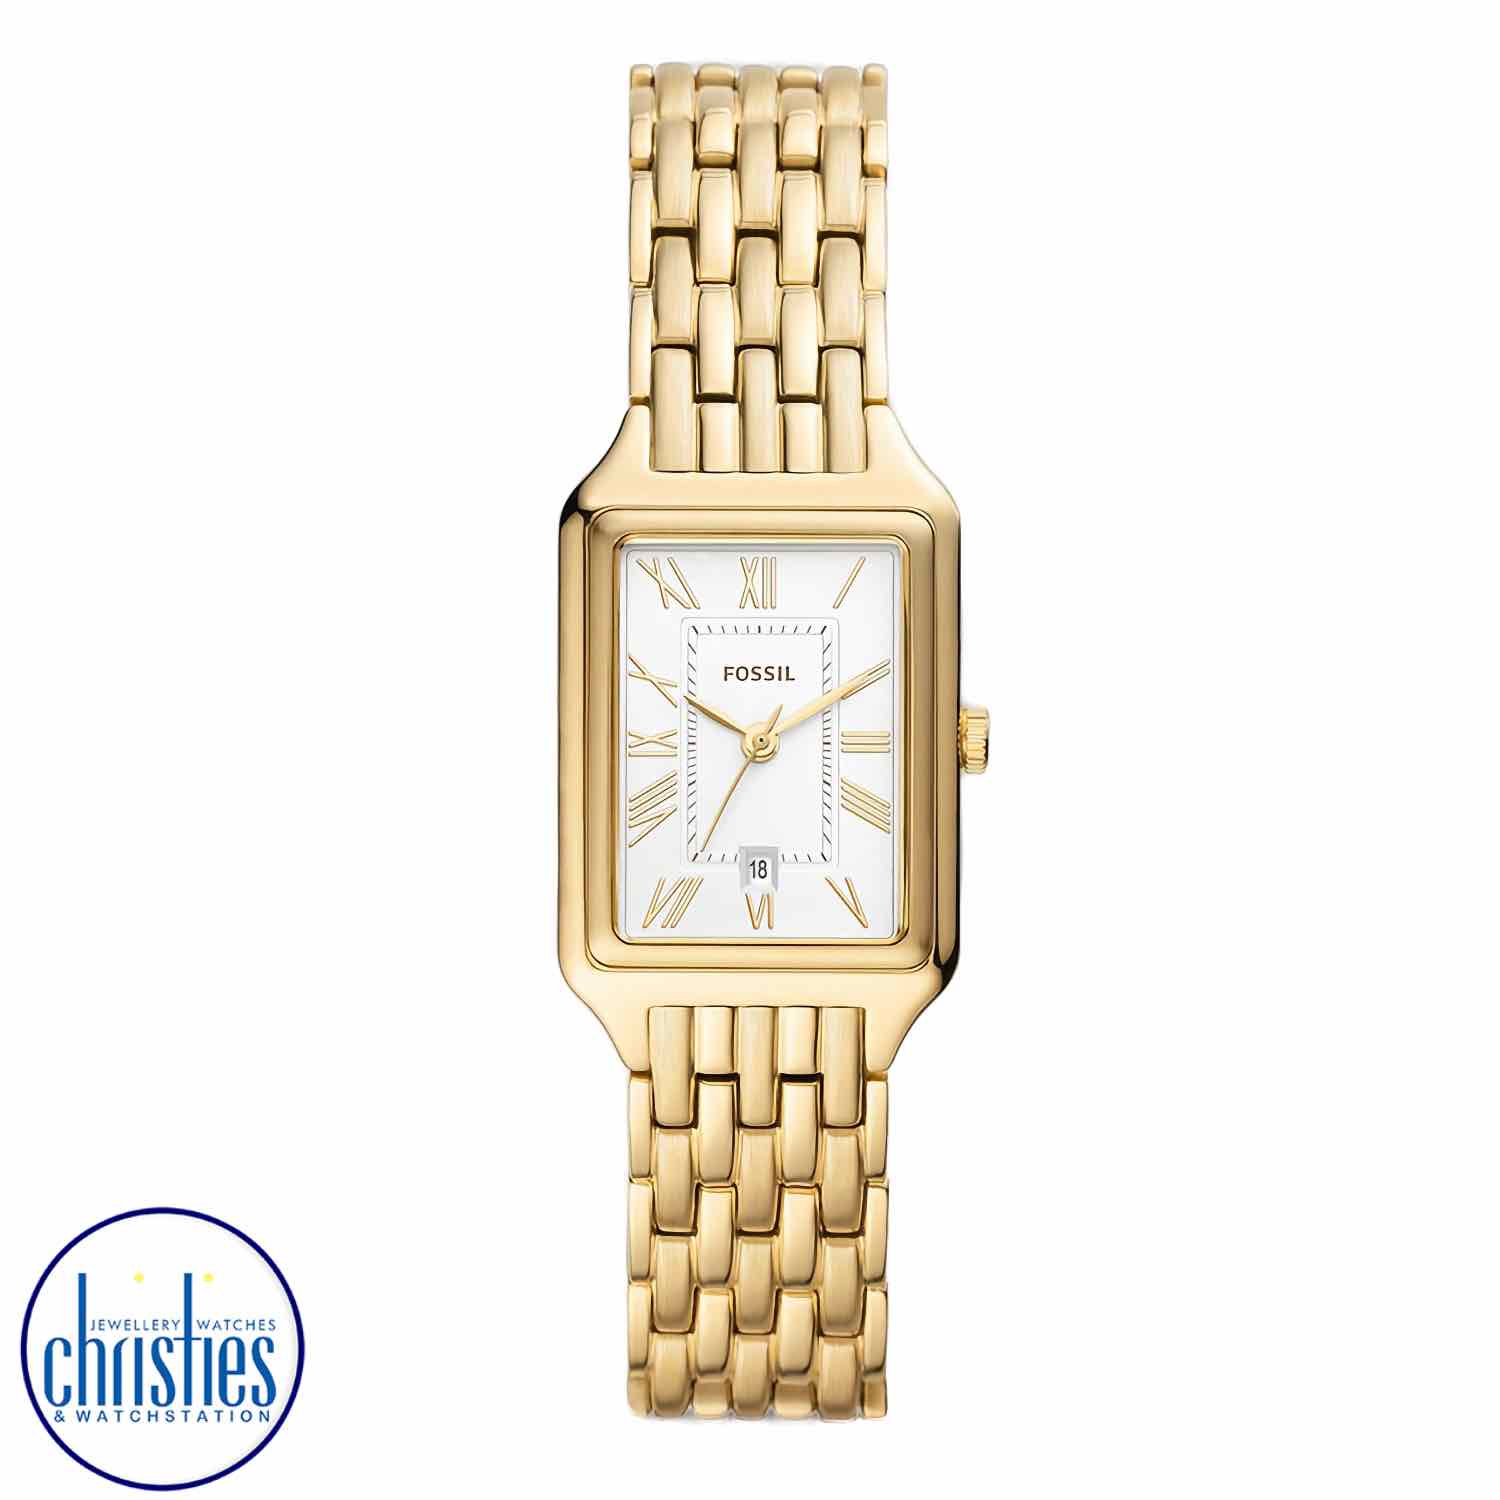 ES5220 Fossil Raquel Gold-Tone Watch. ES5220 Fossil Raquel Three-Hand Date Gold-Tone Stainless Steel WatchAfterpay - Split your purchase into 4 instalments - Pay for your purchase over 4 instalments, due every two weeks.